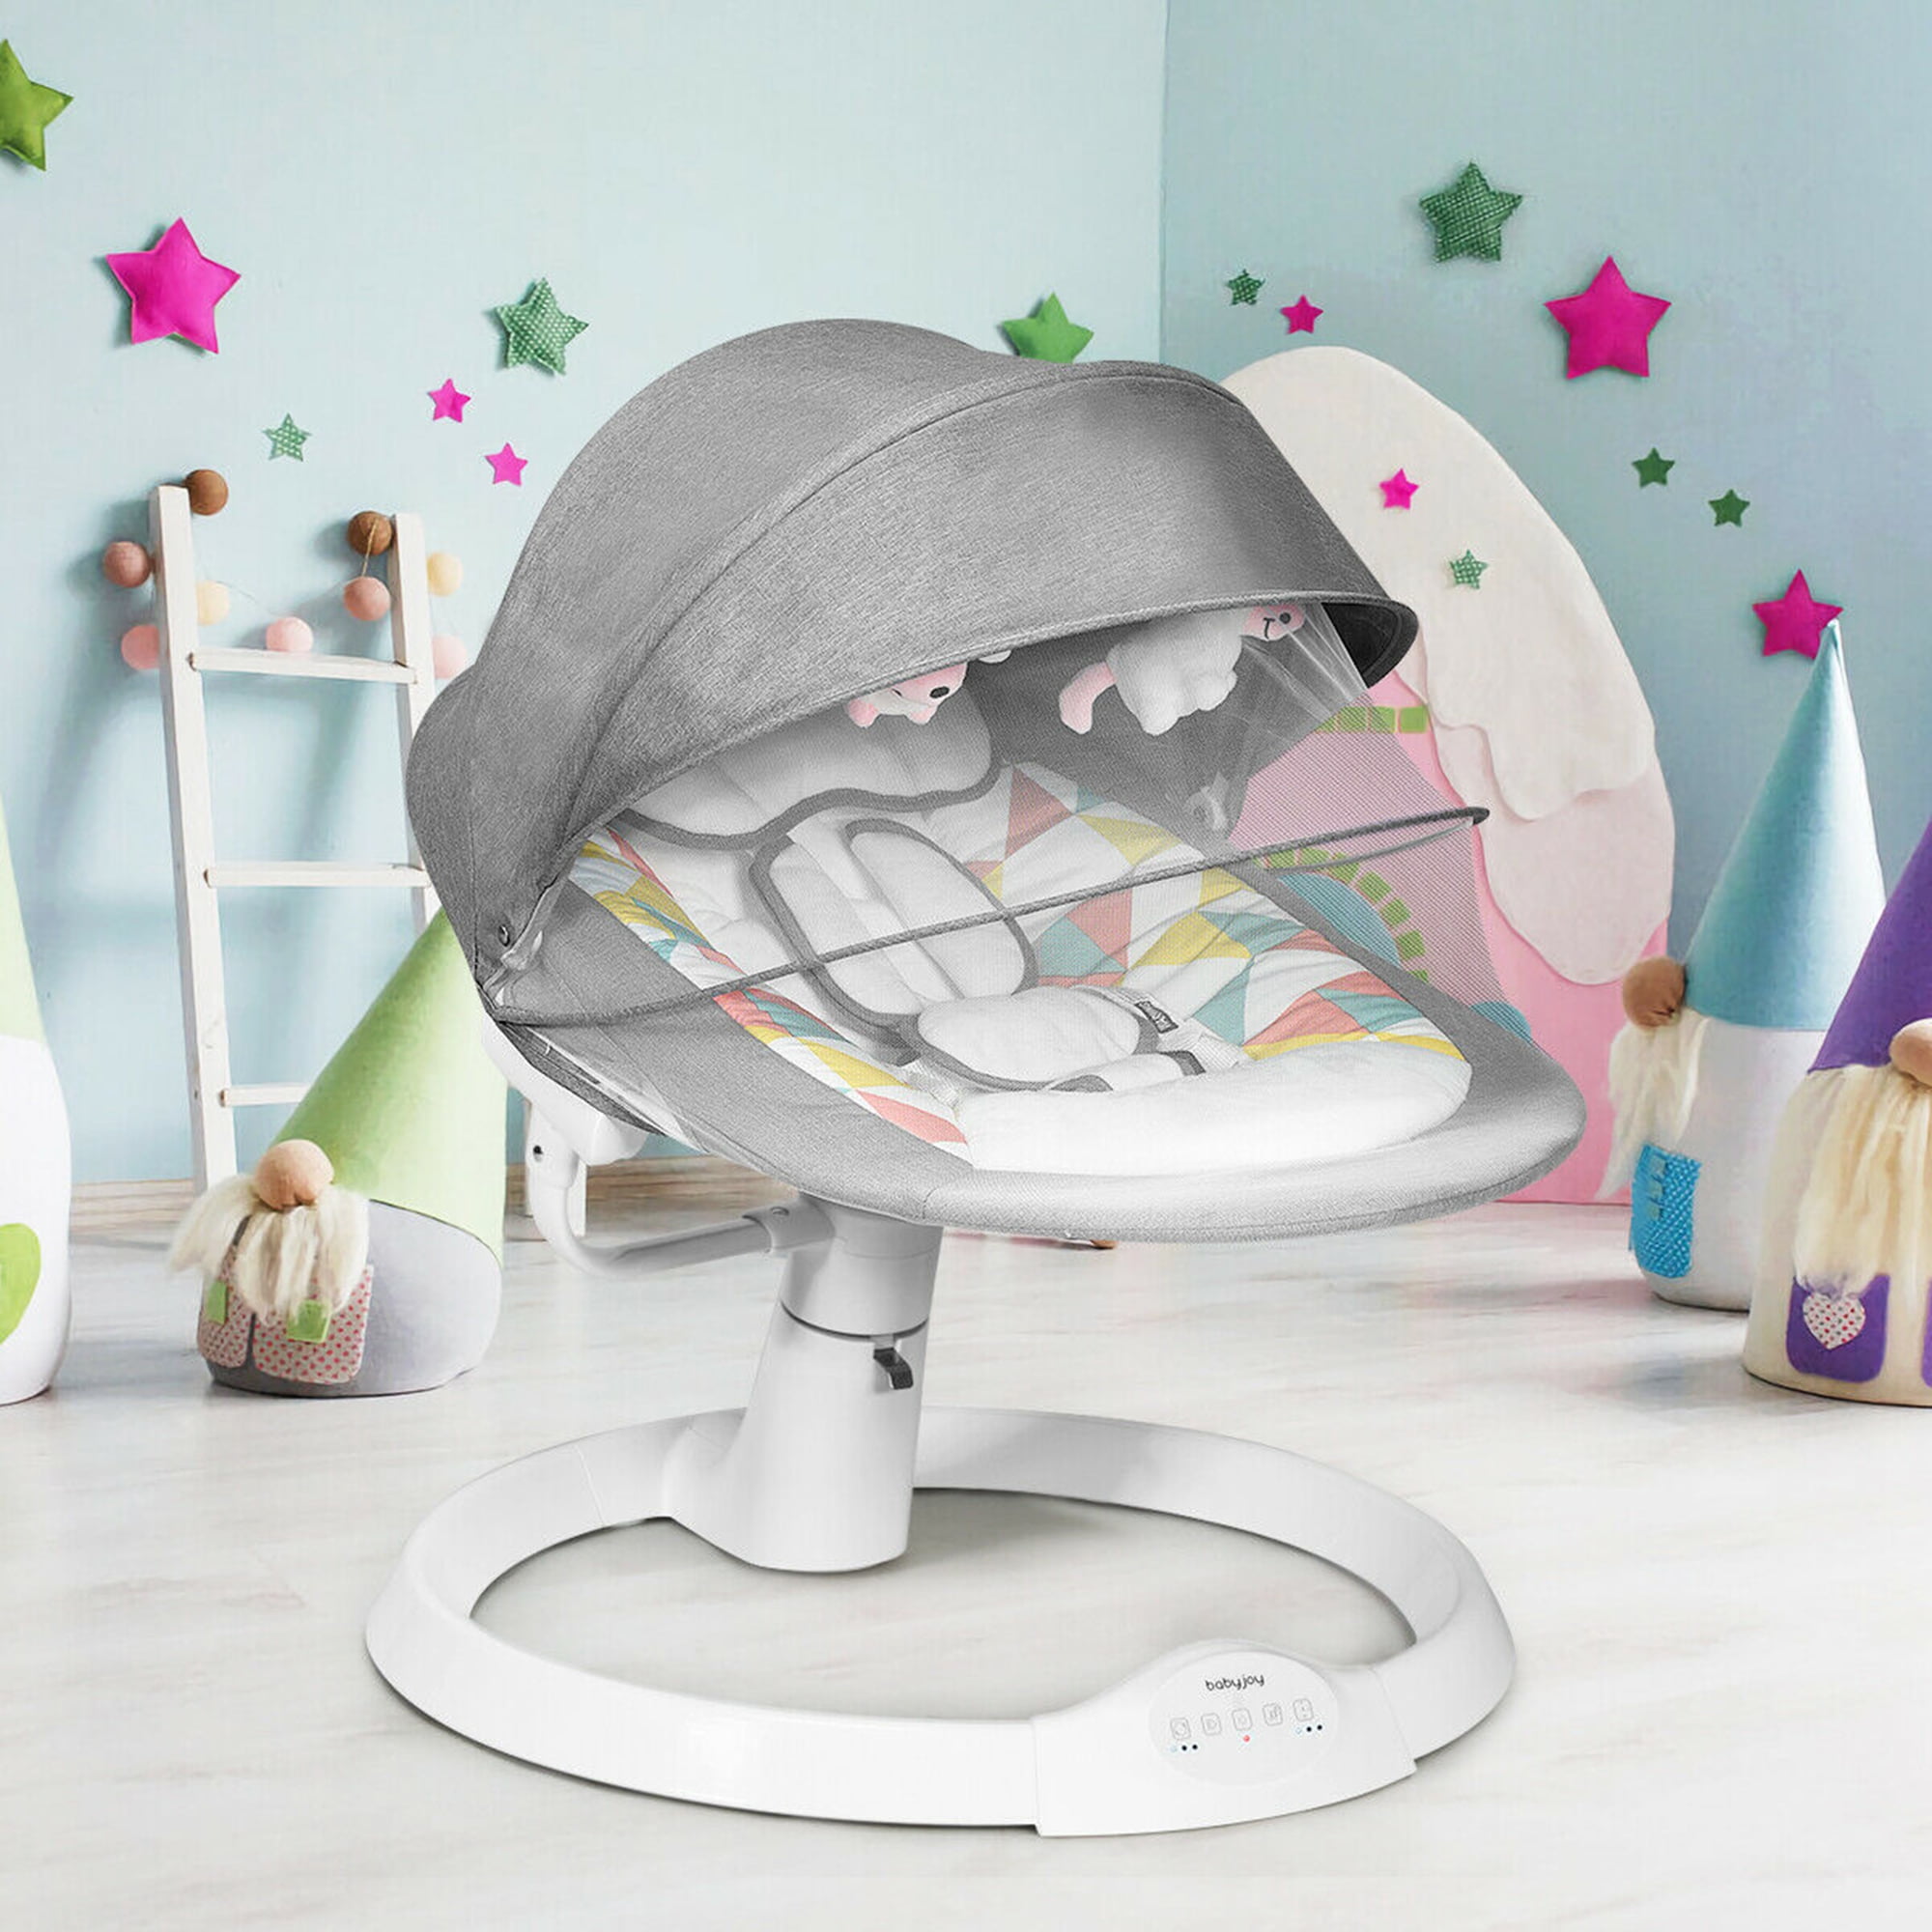 Baby Cradle Swing from US, Multicolour Portable Multifunctional Electric Baby Swing & Seat Rocking Chair Infants Bouncer Rocker Swing Chair with Music Toys 